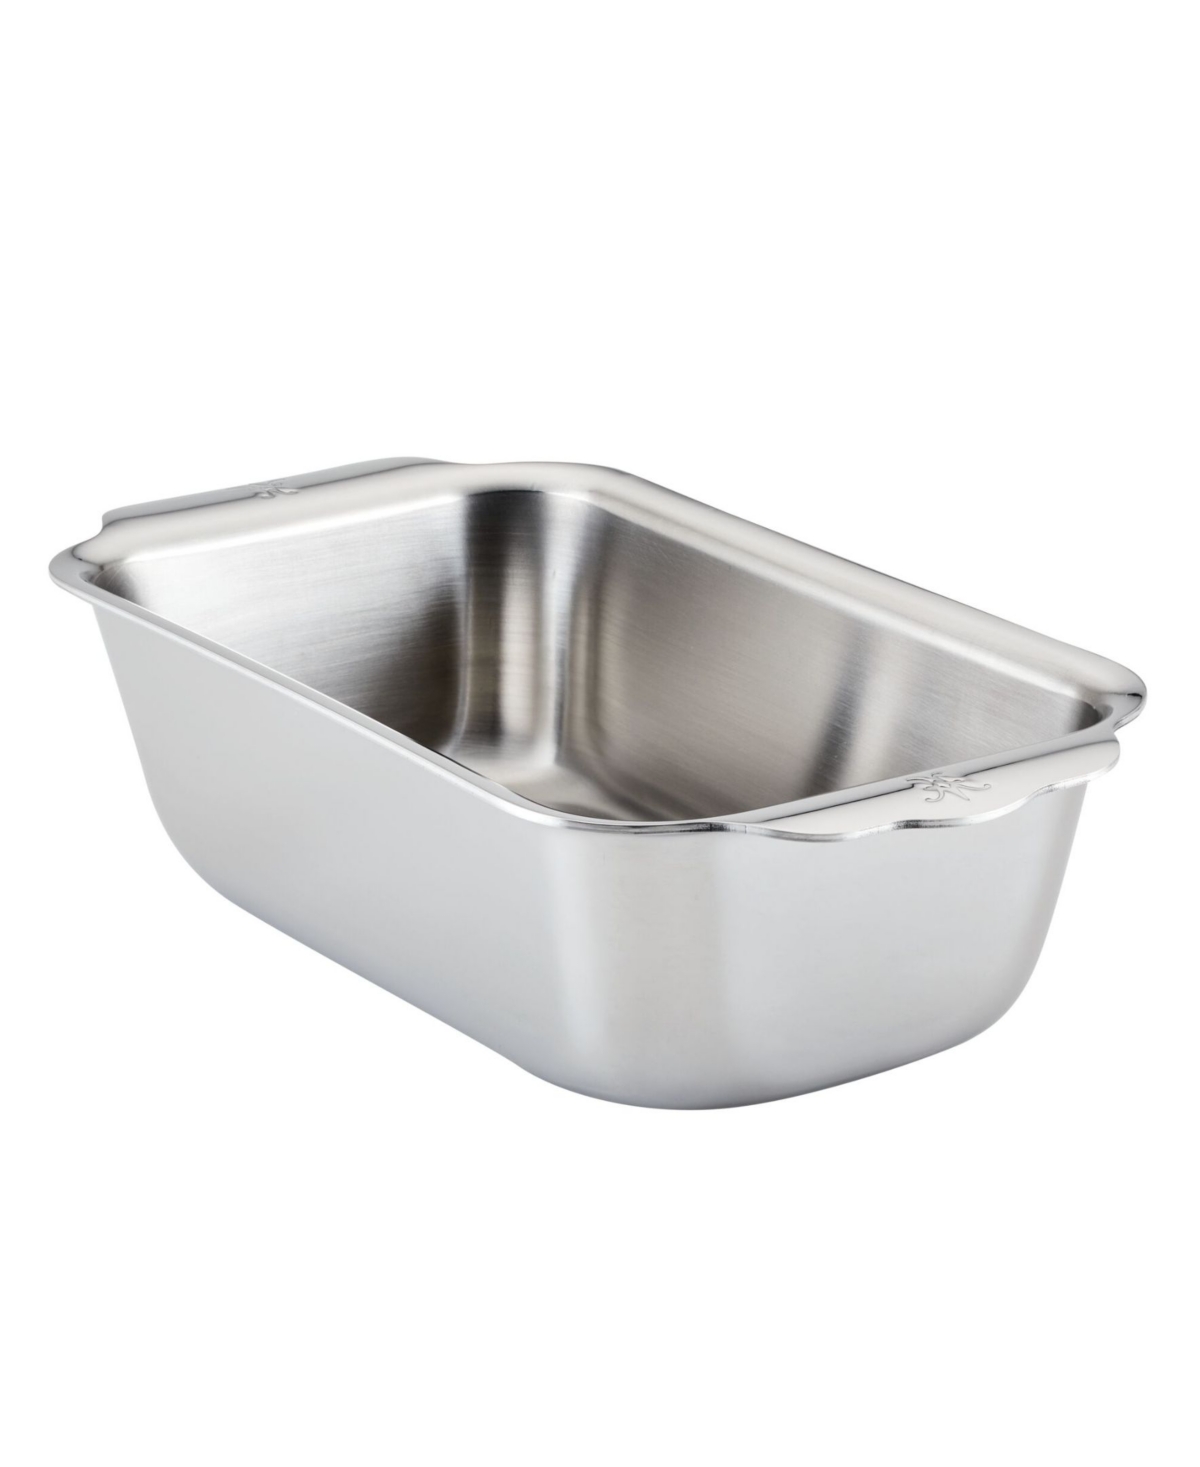 Hestan Provisions Oven Bond Try-plyl 1.75-quart Loaf Pan In Stainless Steel